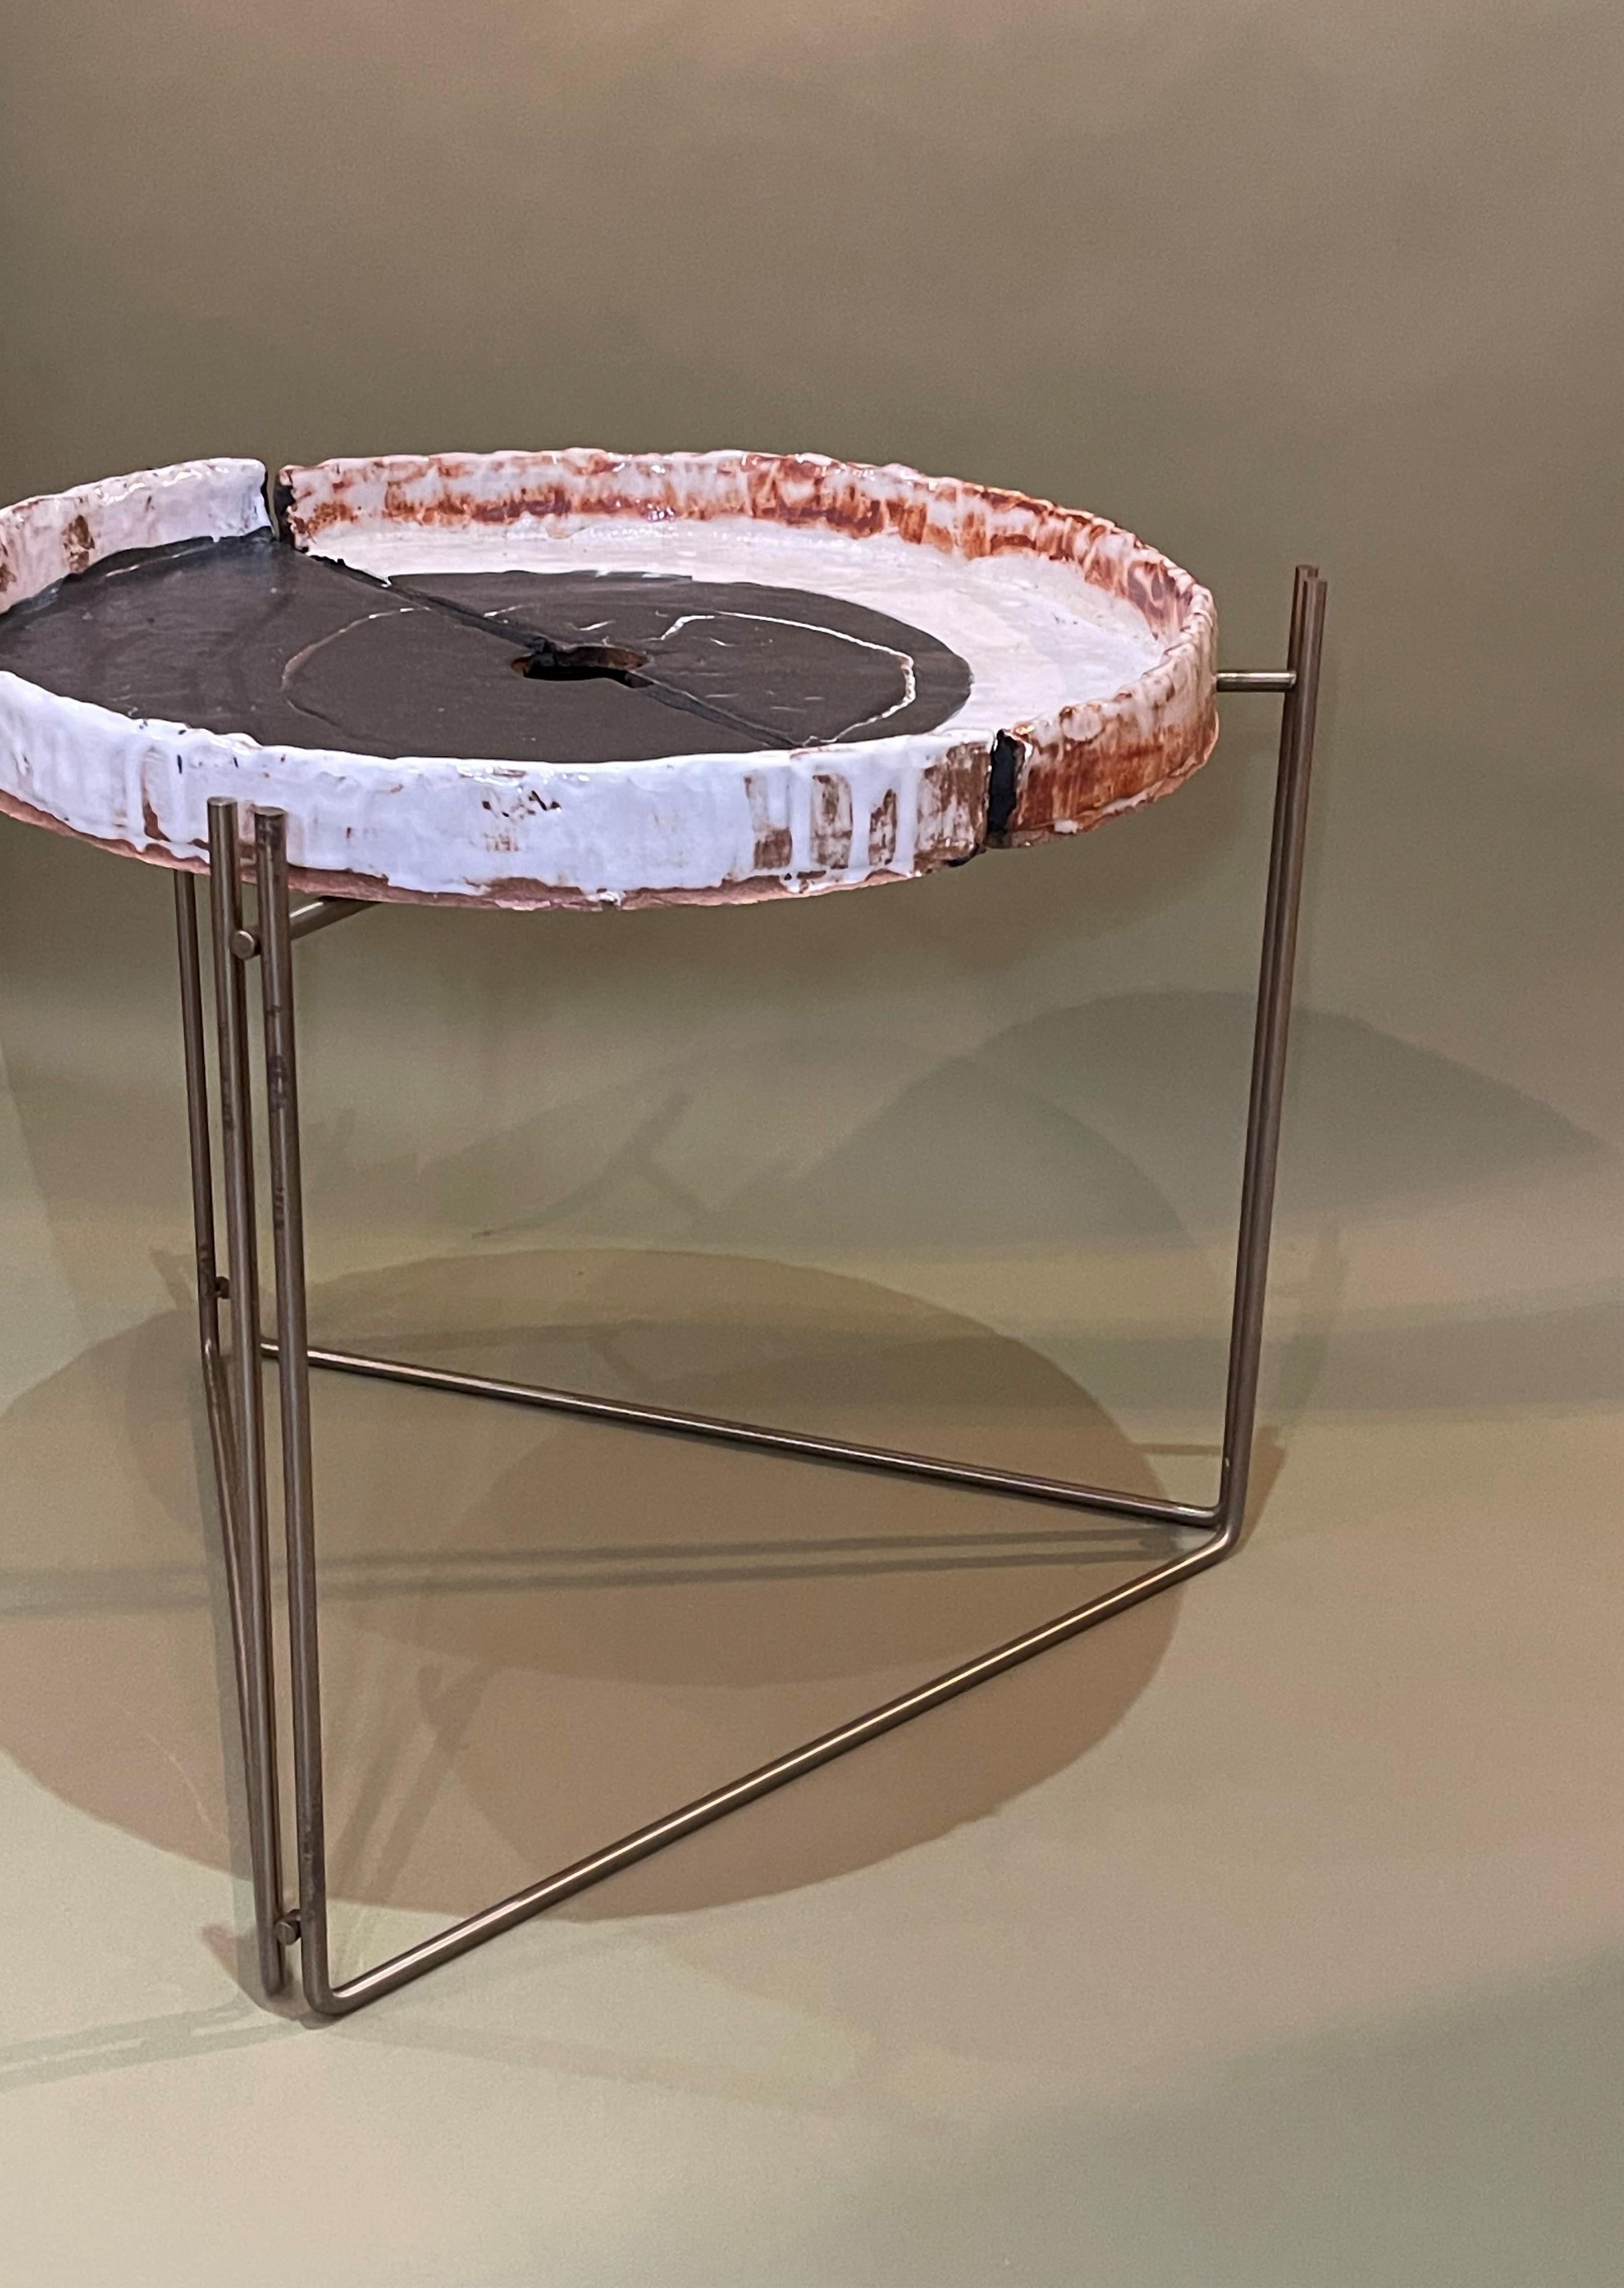 Coffee Table 'or Side' Ceramic Top & S Steel by Hannelore Freer and Filipe Ramos For Sale 2